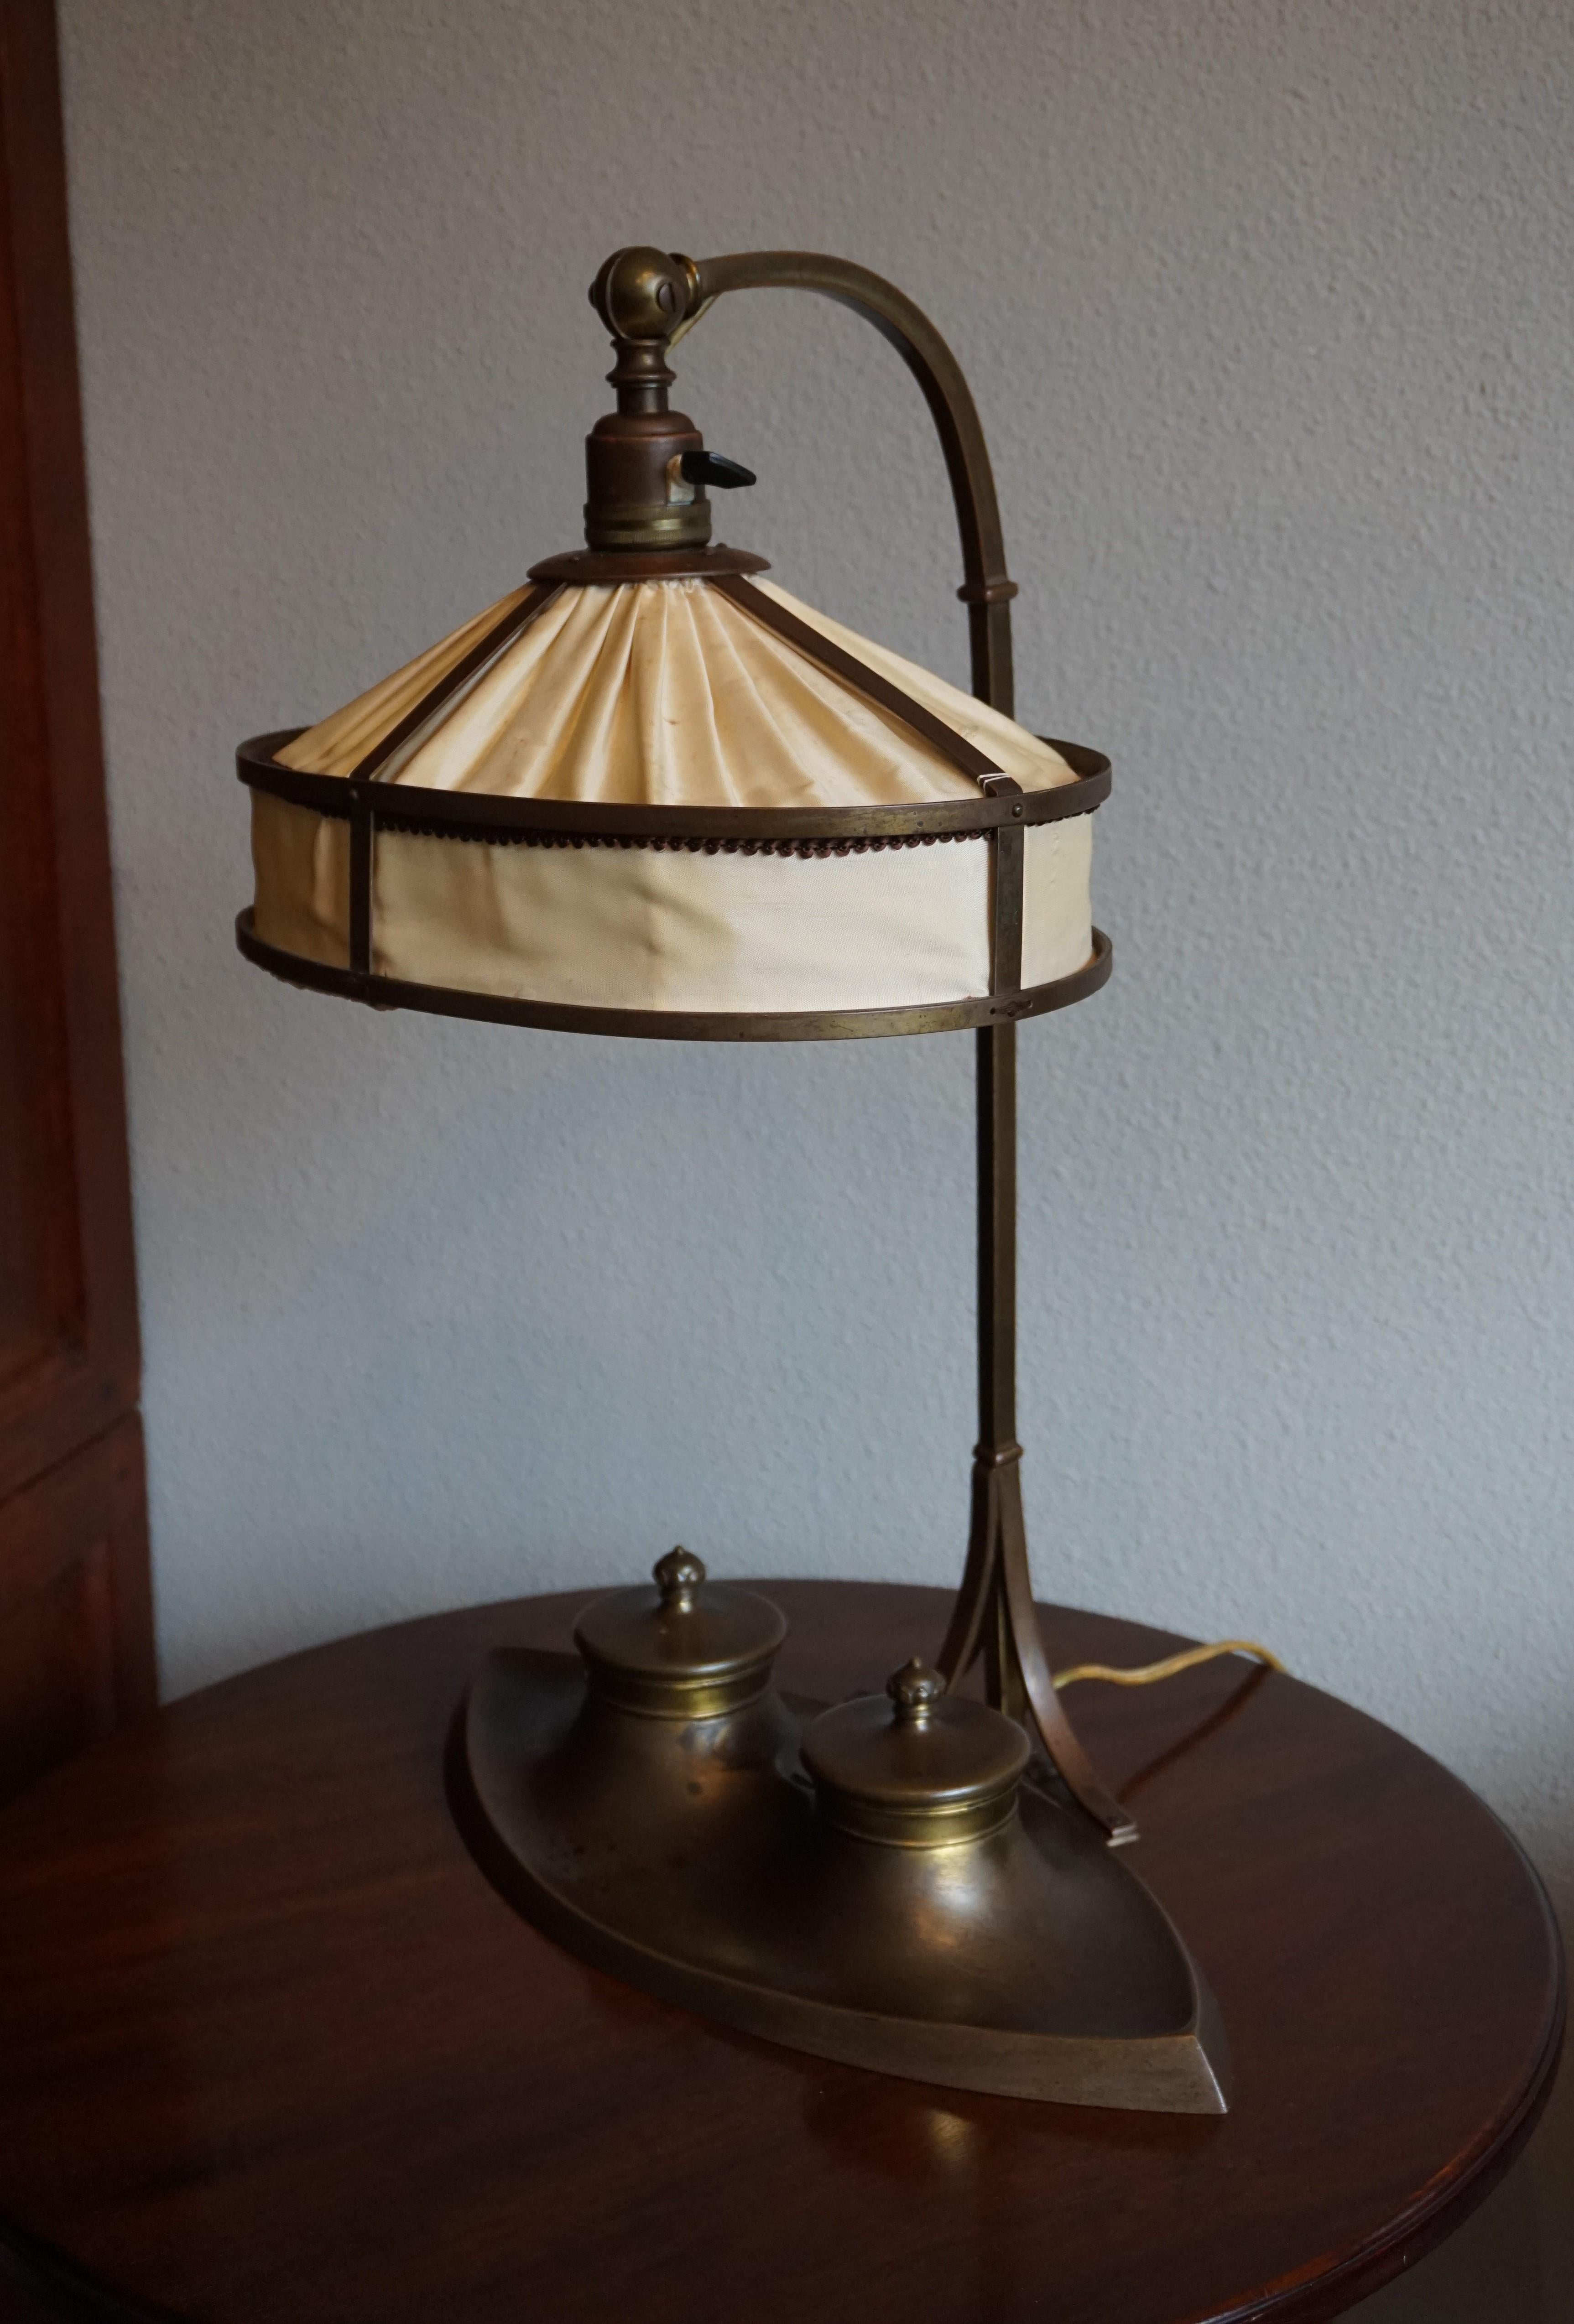 Beautiful and very stylish Arts & Crafts table or desk lamp.

If you are looking for a one of a kind table or desk lamp to grace your home or office space then this top quality piece of Arts & Crafts workmanship could be flying your way soon. The